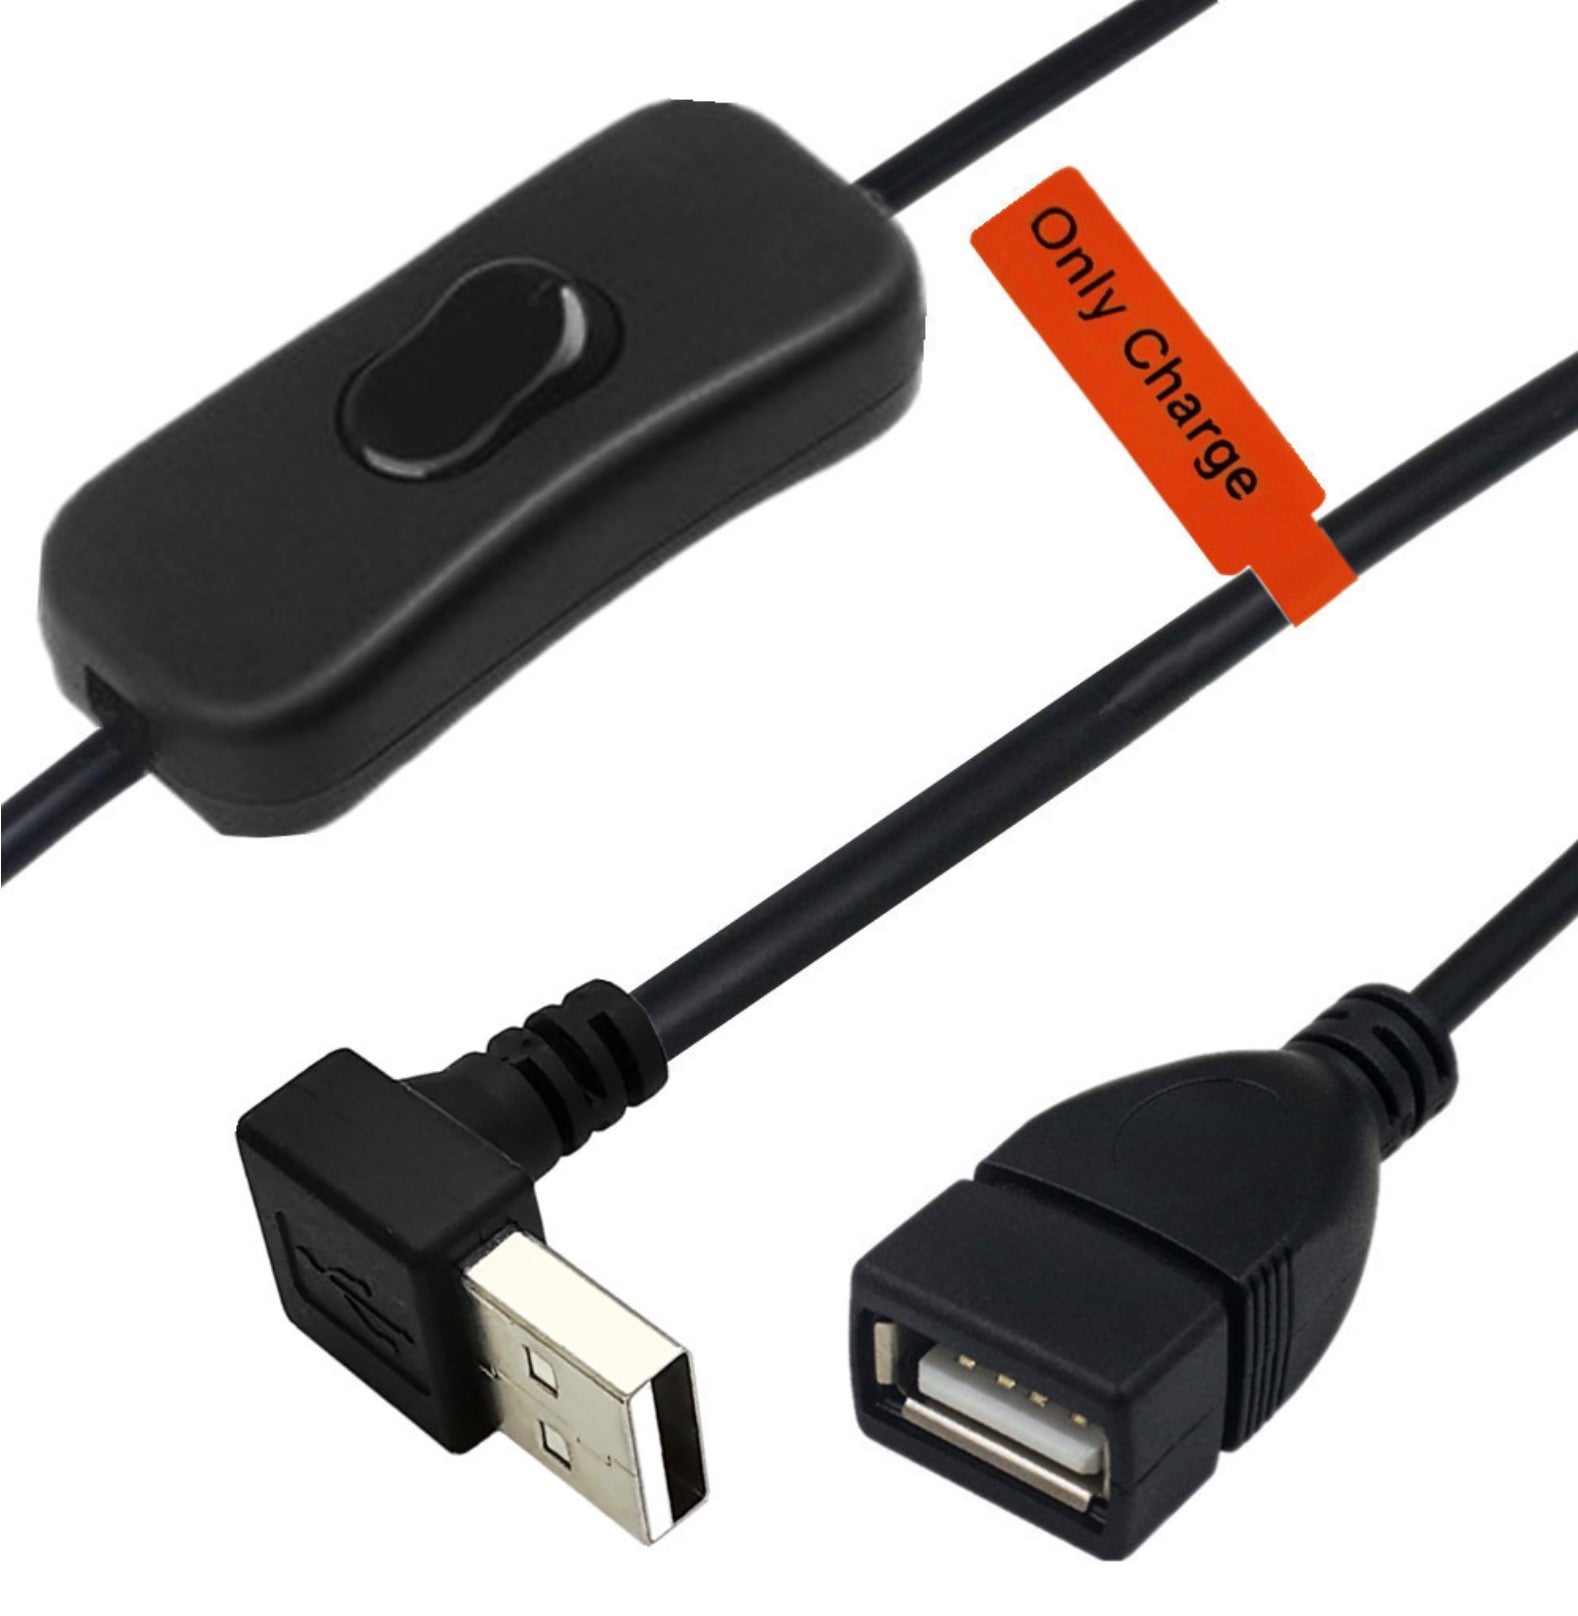 USB 2.0 A Male to Female 3A Charging Extension Cable with On/Off Switch 0.3m